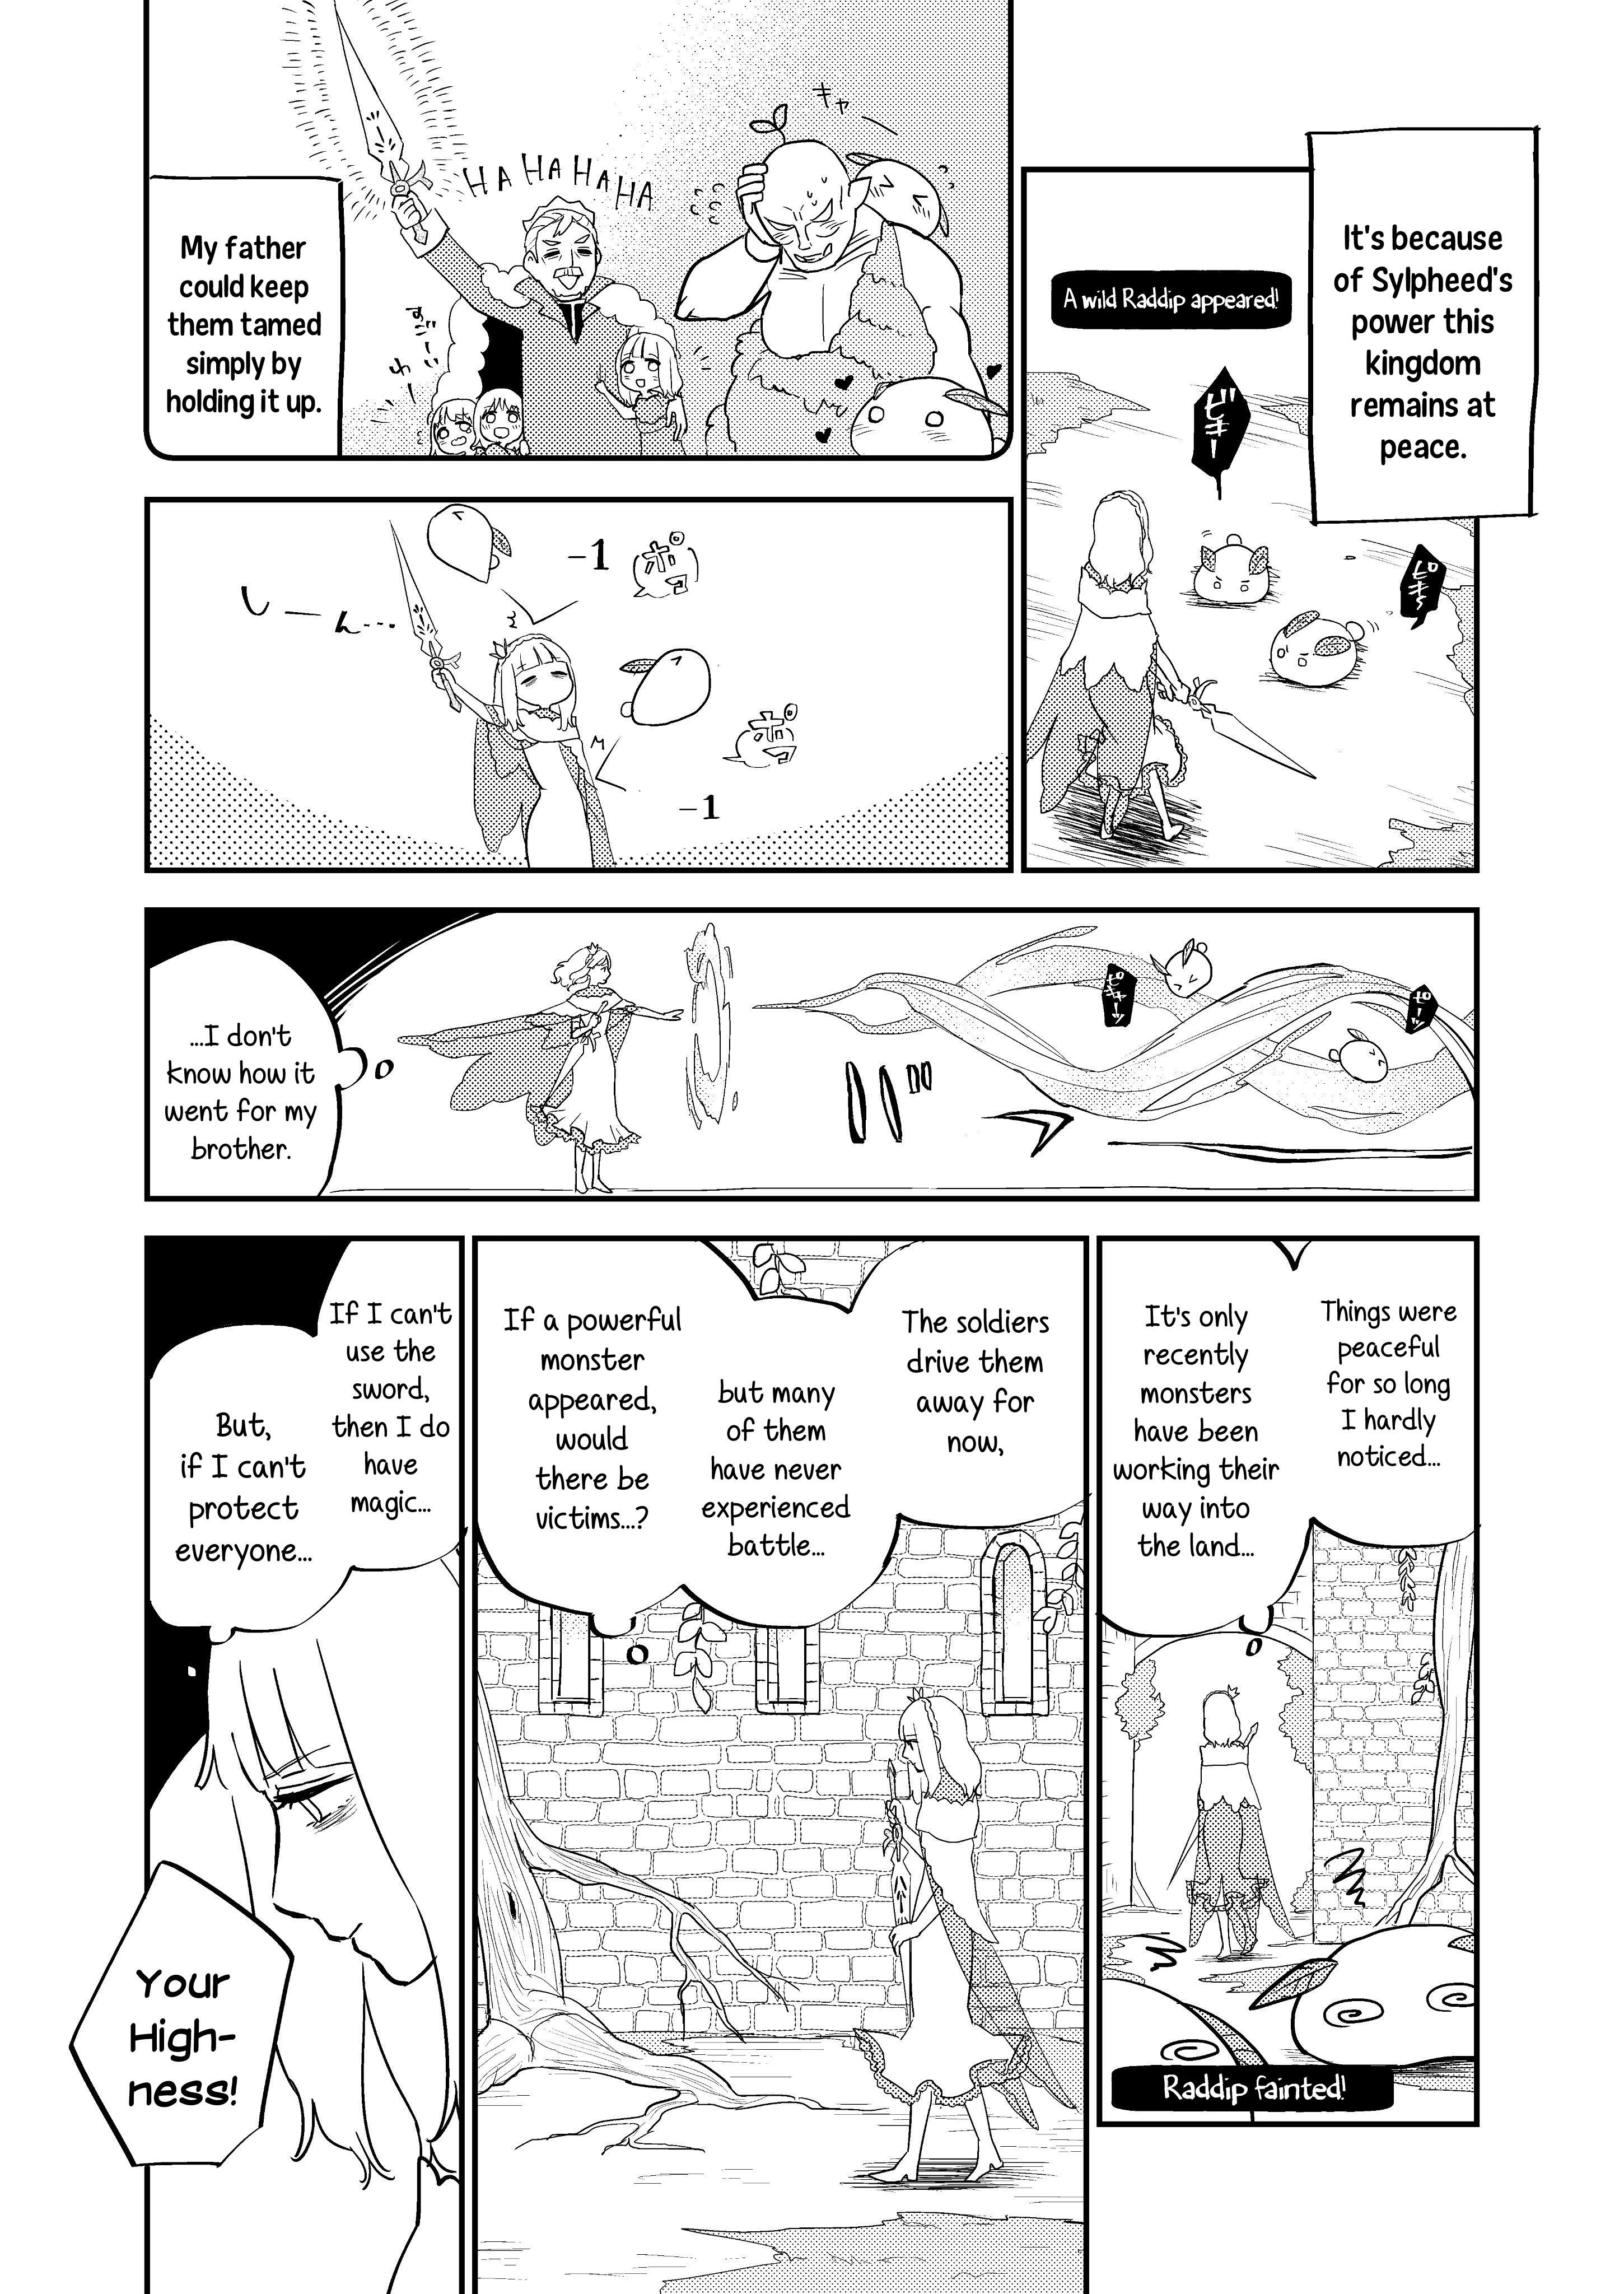 The Princess Of Sylph (Twitter Version) - Page 2